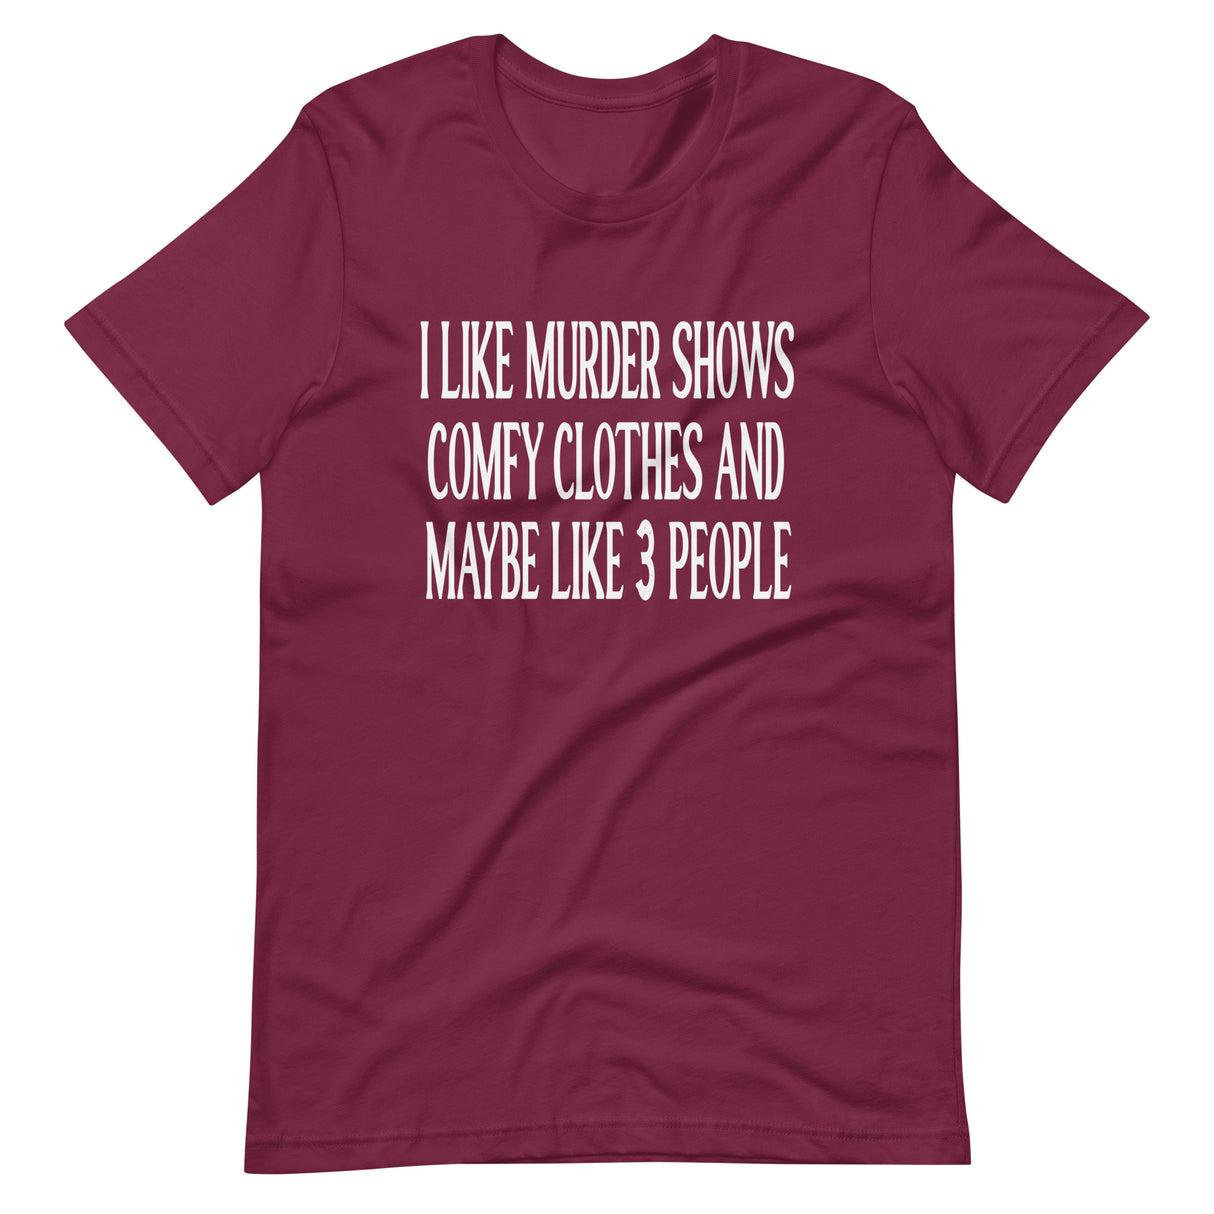 I Like Murder Shows Comfy Clothes and Maybe Like 3 People Shirt